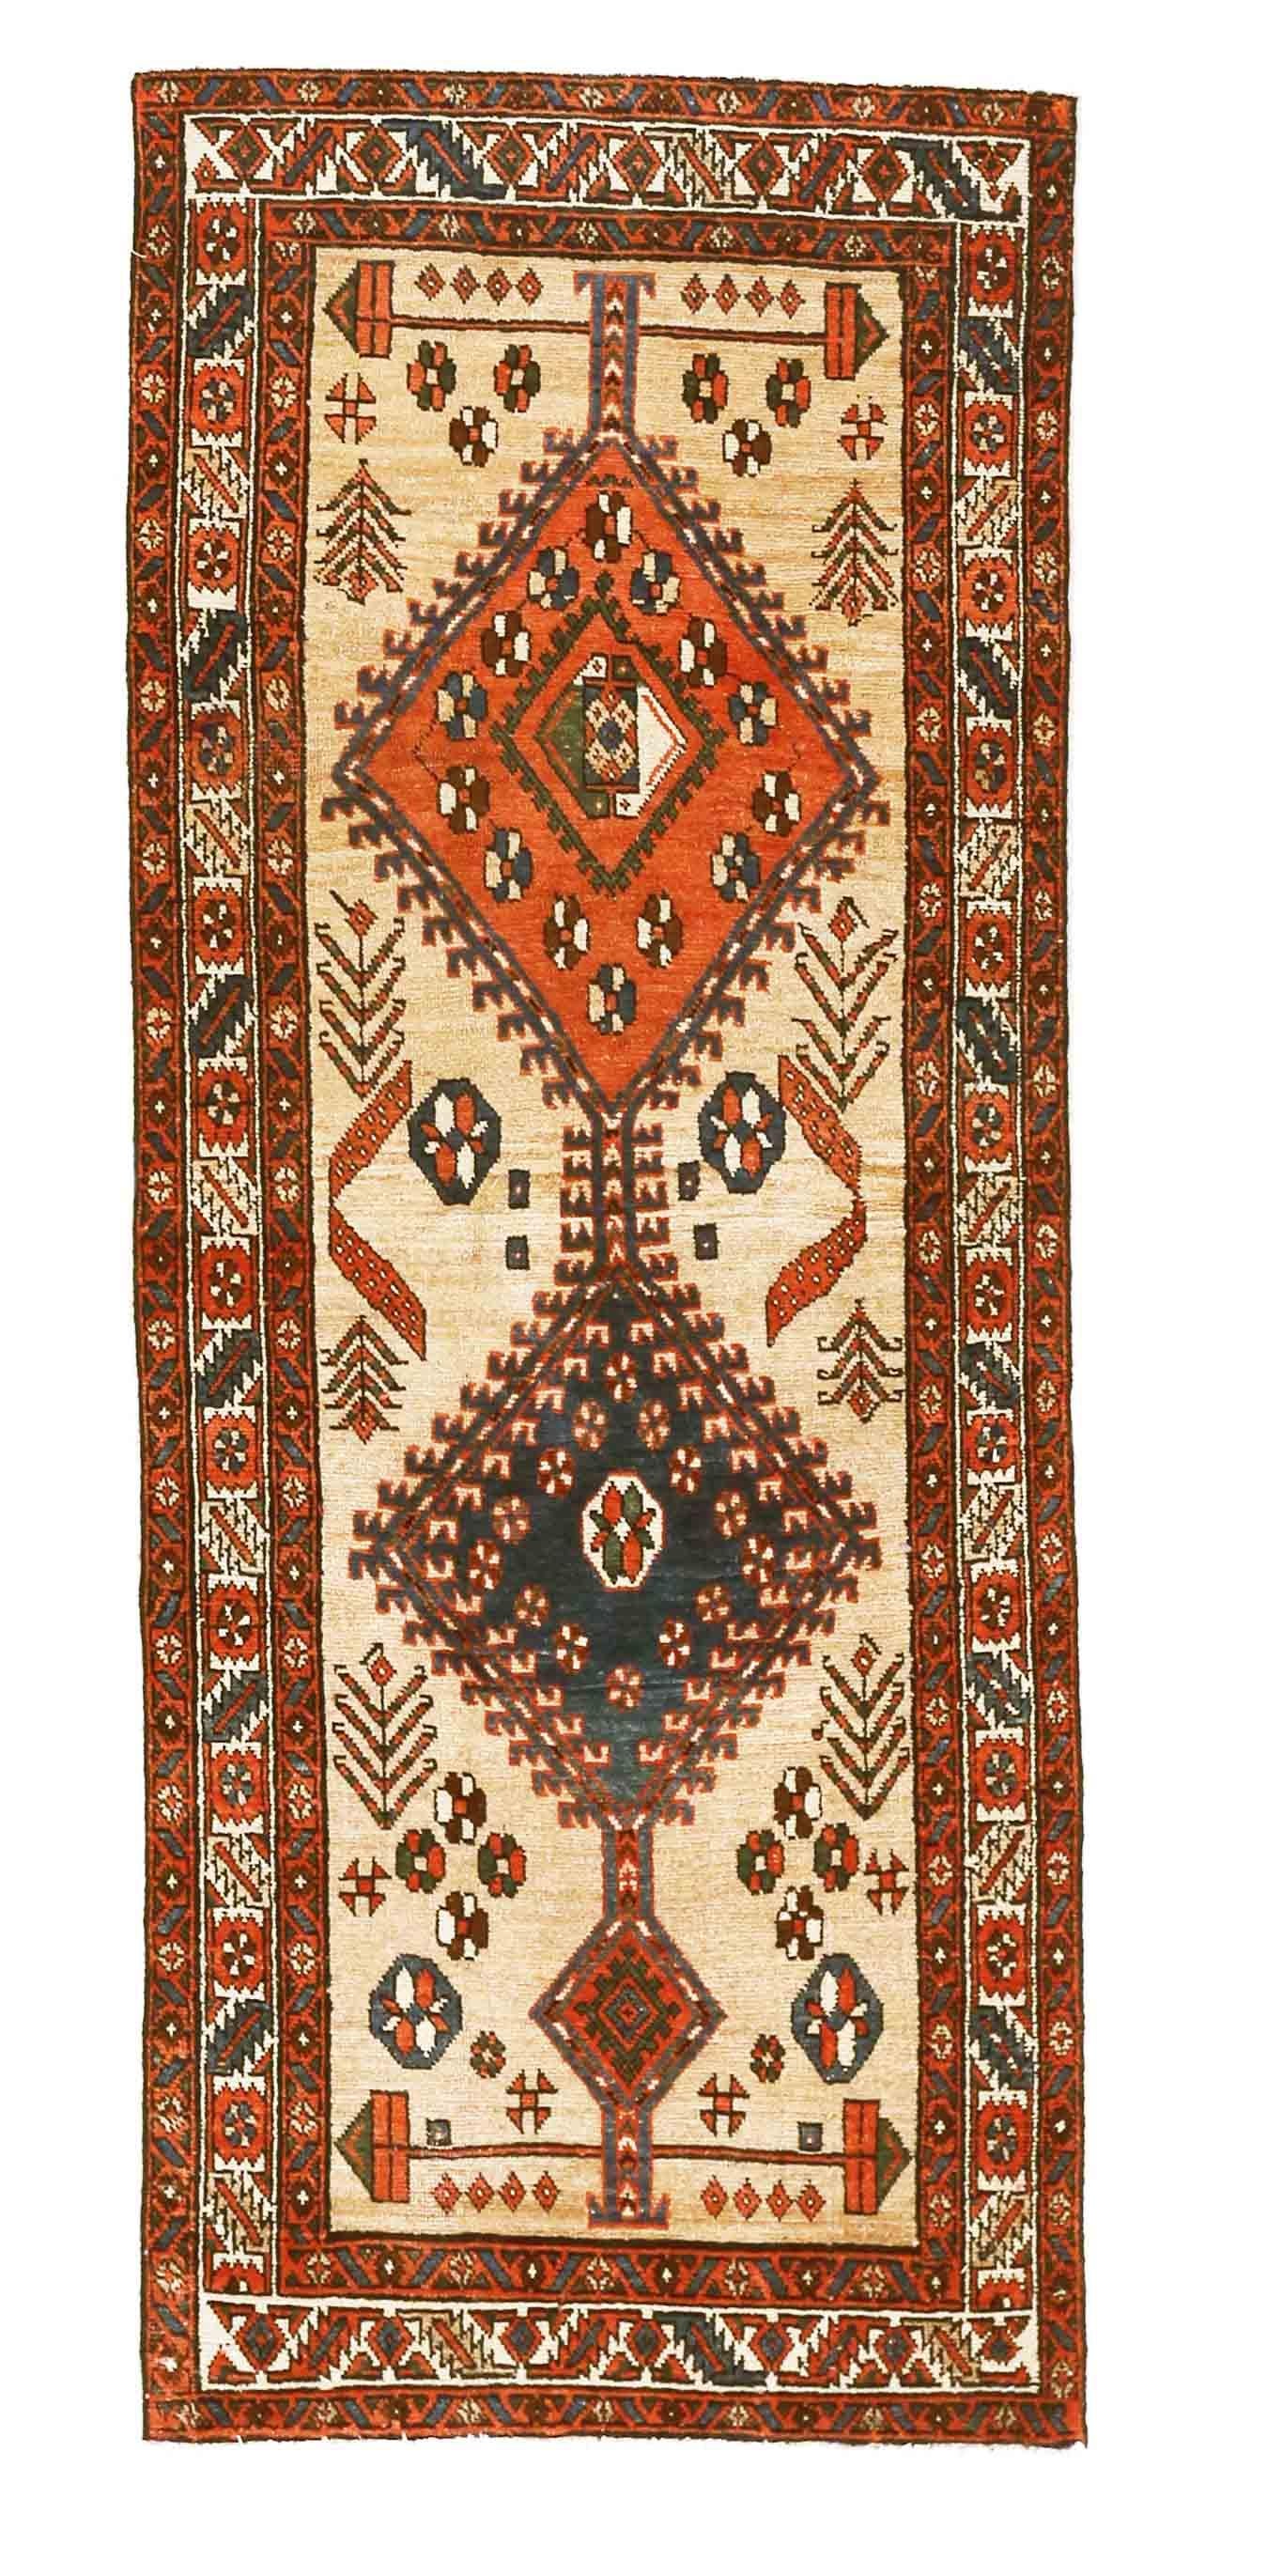 One-of-a-kind antique Persian rug inspired by Azerbaijan design patterns. The fine details are highlighted by the exquisite camel hair backing which perfectly blends all the colors of the carpet. The antique Persian rug has a 2’9” x 6”7” dimension